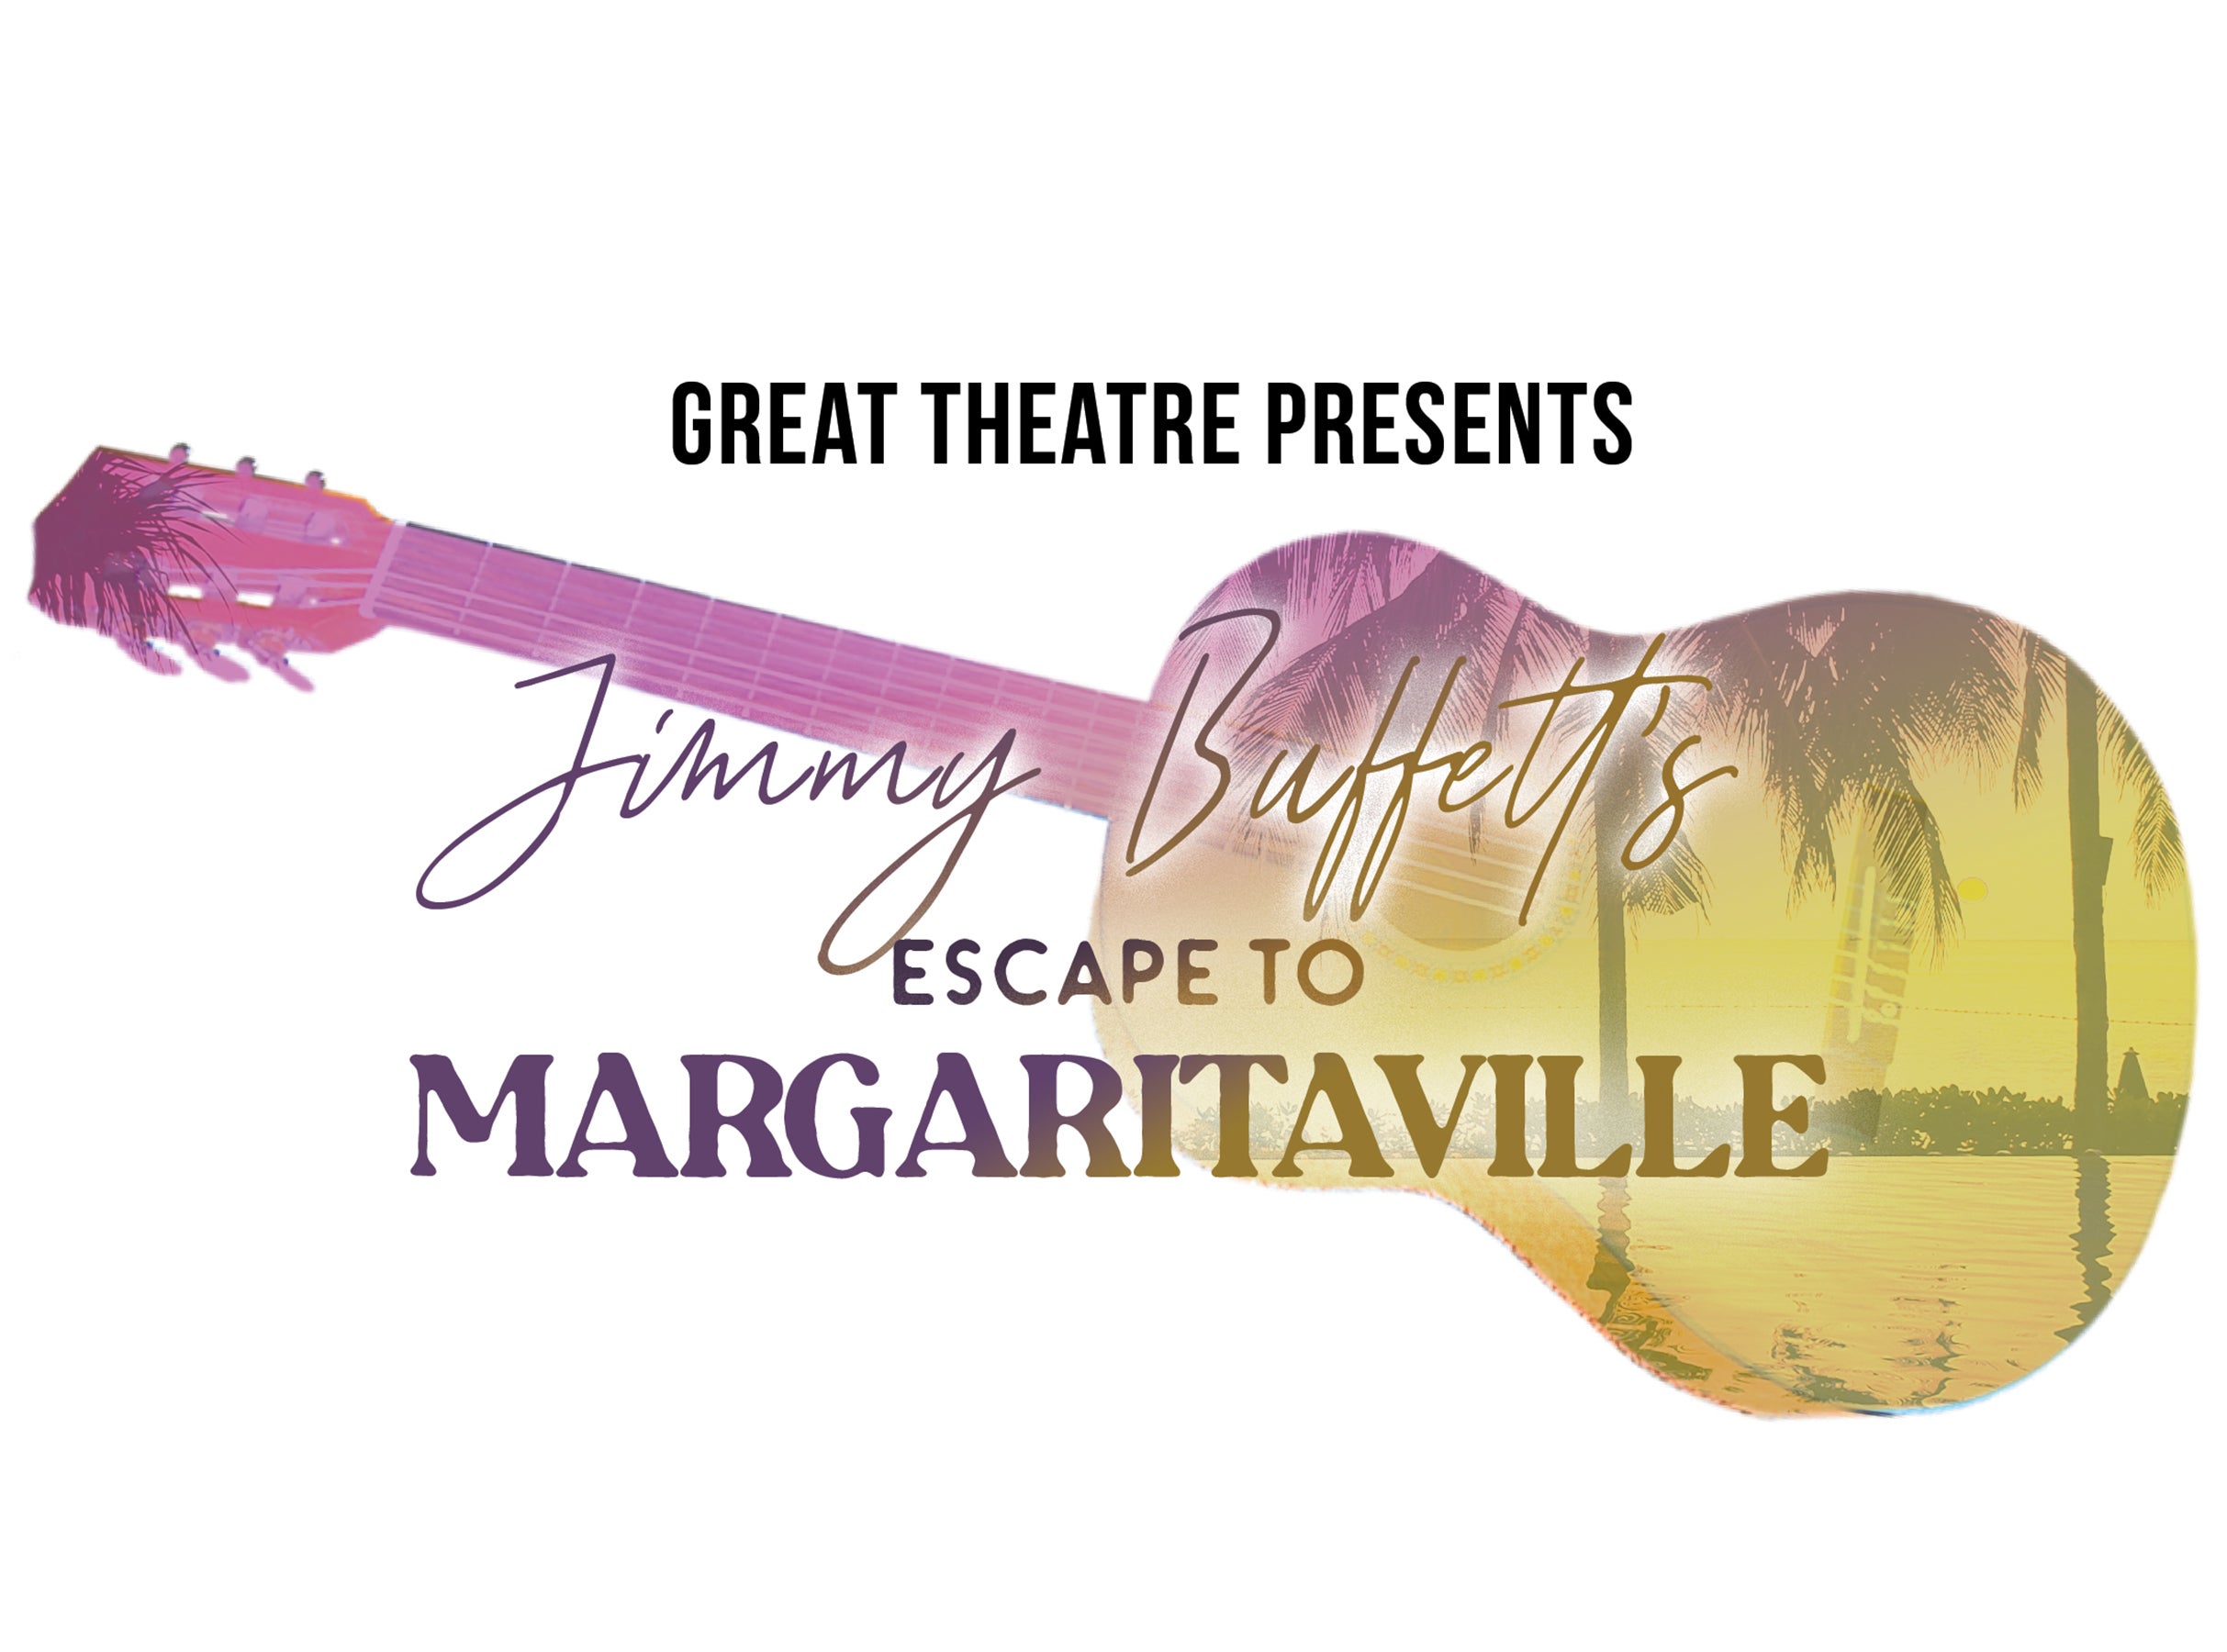 GREAT Theatre presents: Jimmy Buffett's Escape to Margaritaville in Waite Park event information